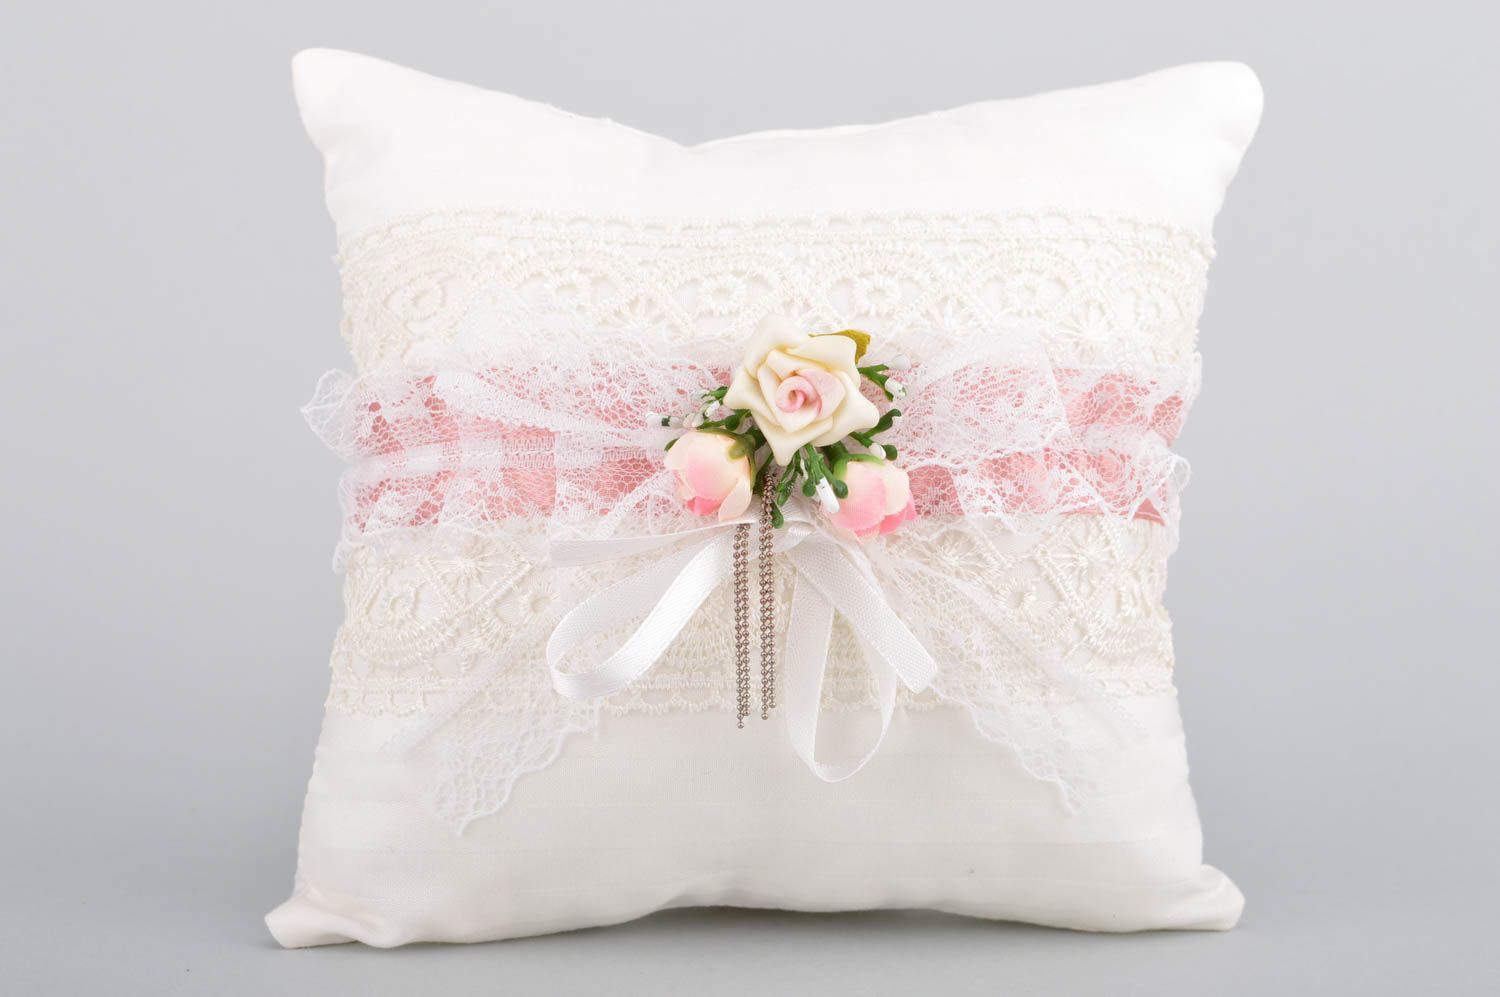 Handmade tender white wedding ring pillow with lace designer accessory photo 2